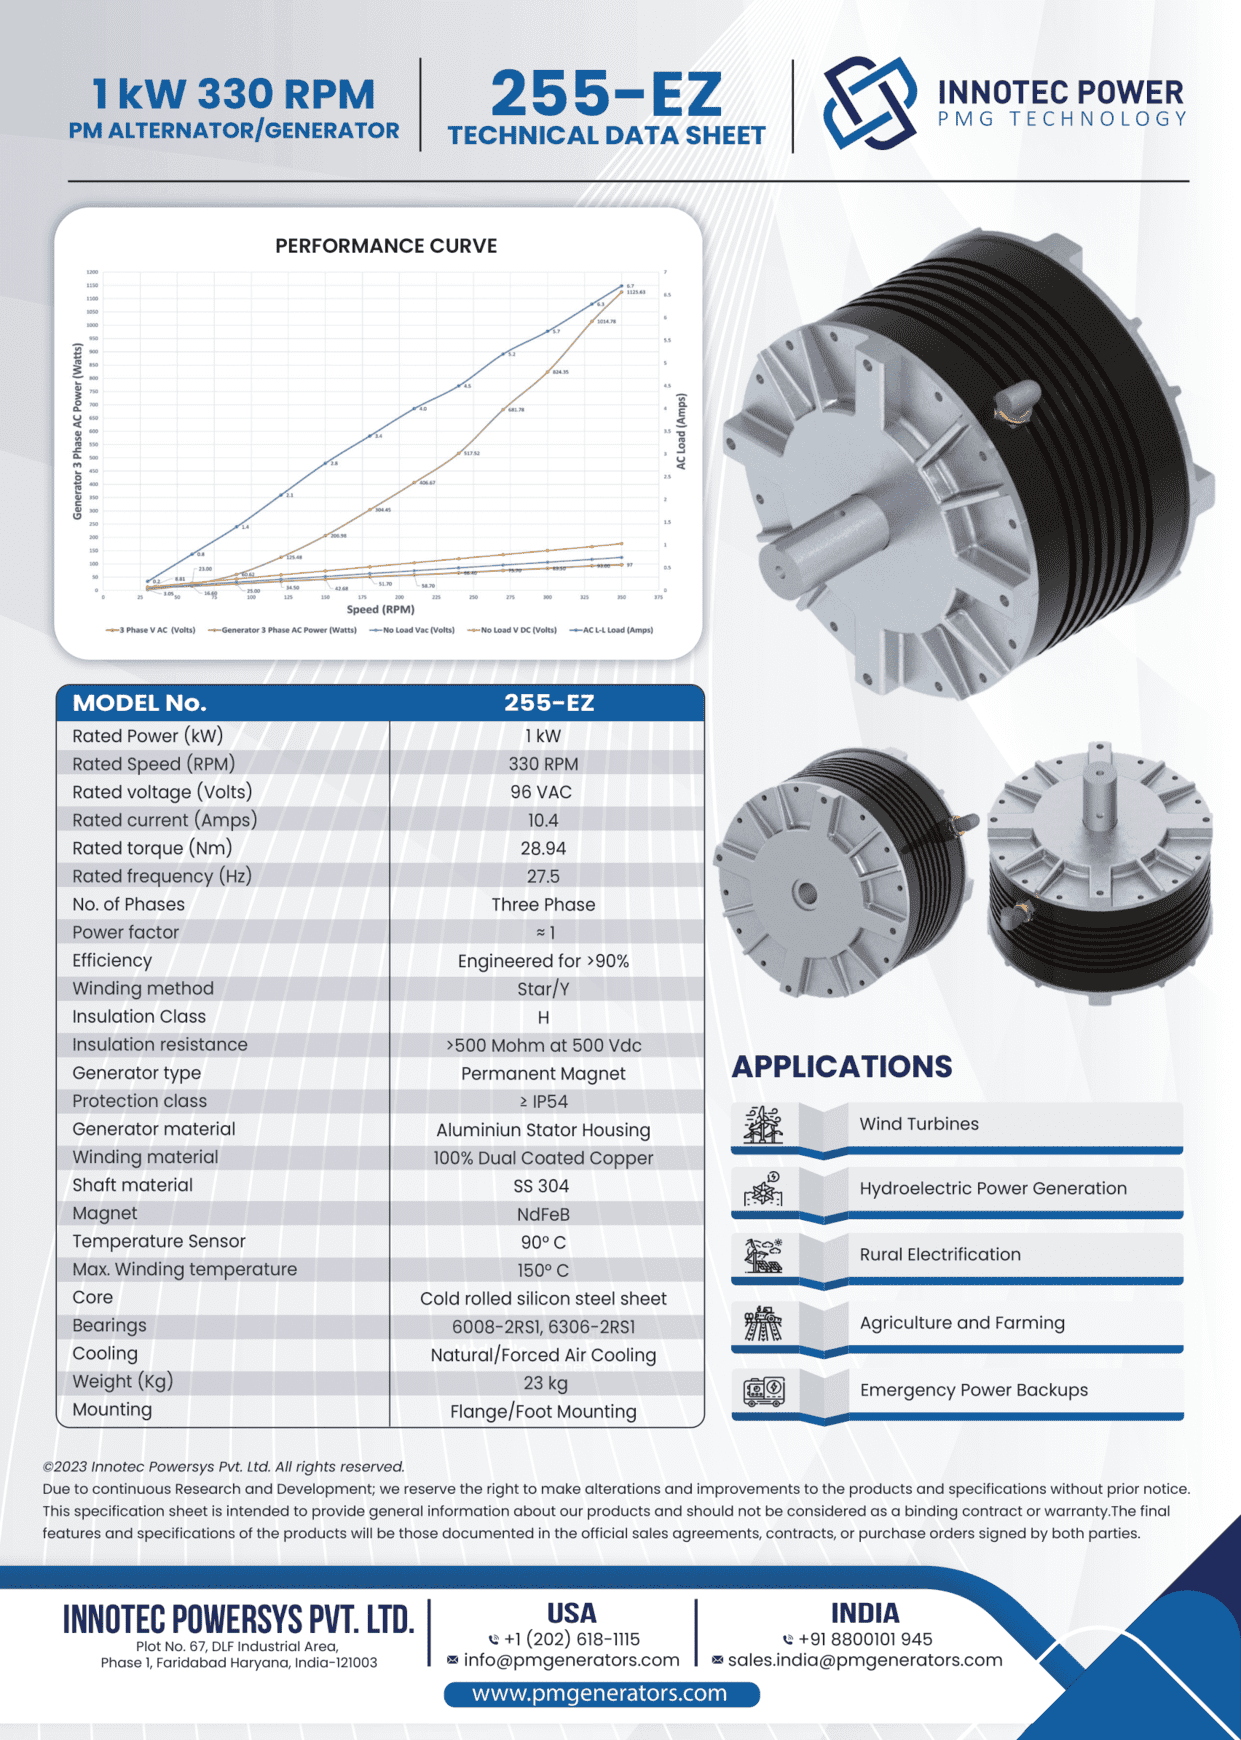 Data sheet of our 1 kW Alternator for Wind Turbine applications at 330 RPM